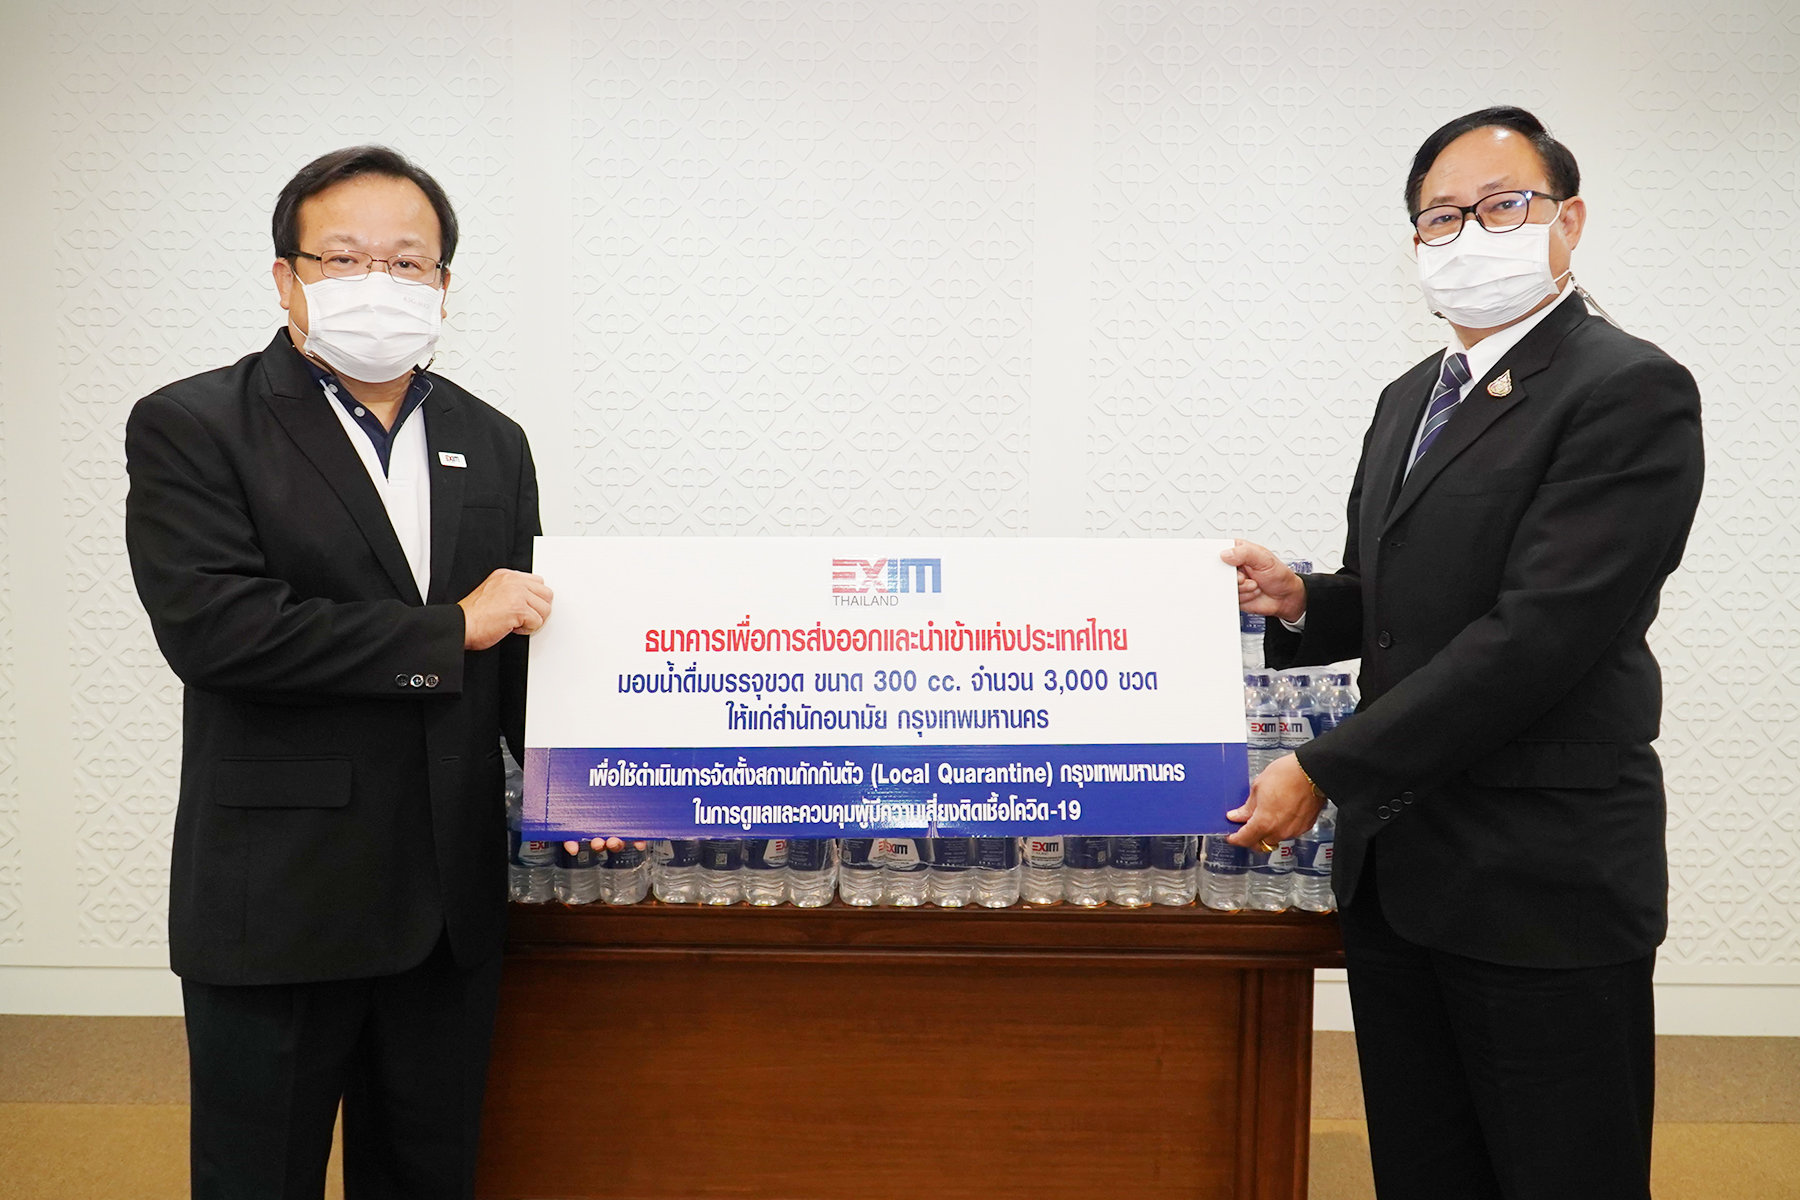 EXIM Thailand Donates Drinking Water to Health Department of Bangkok Metropolitan Administration for Distribution to COVID-19 Risk Groups under Local Quarantine